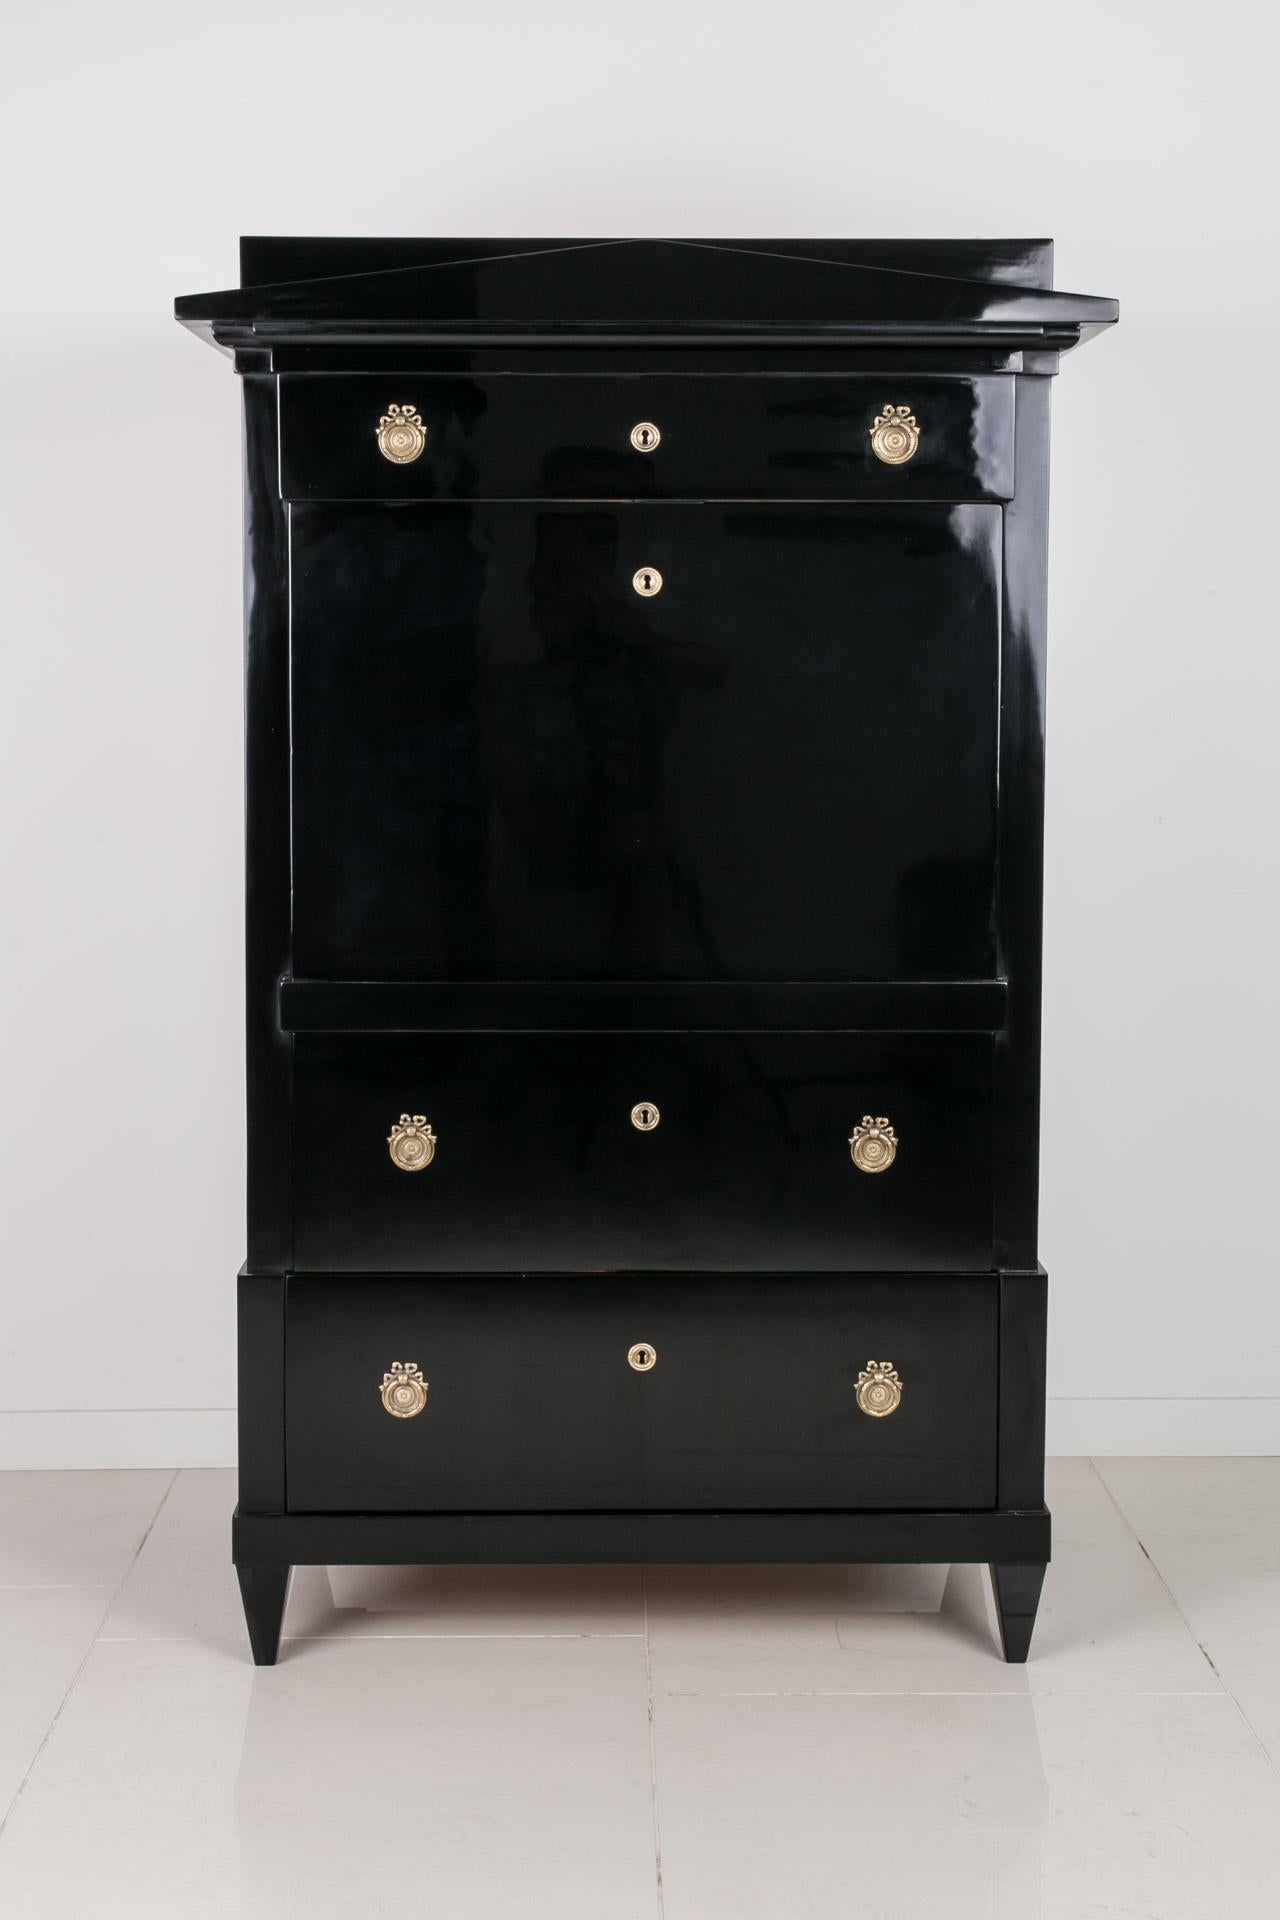 This Biedermeier secretary comes from Germany and was constructed in 19th century. It is made of coniferous wood, veneered with birch. It has undergone a professional renovation process. Surface finished with black shellac polish applied by hand